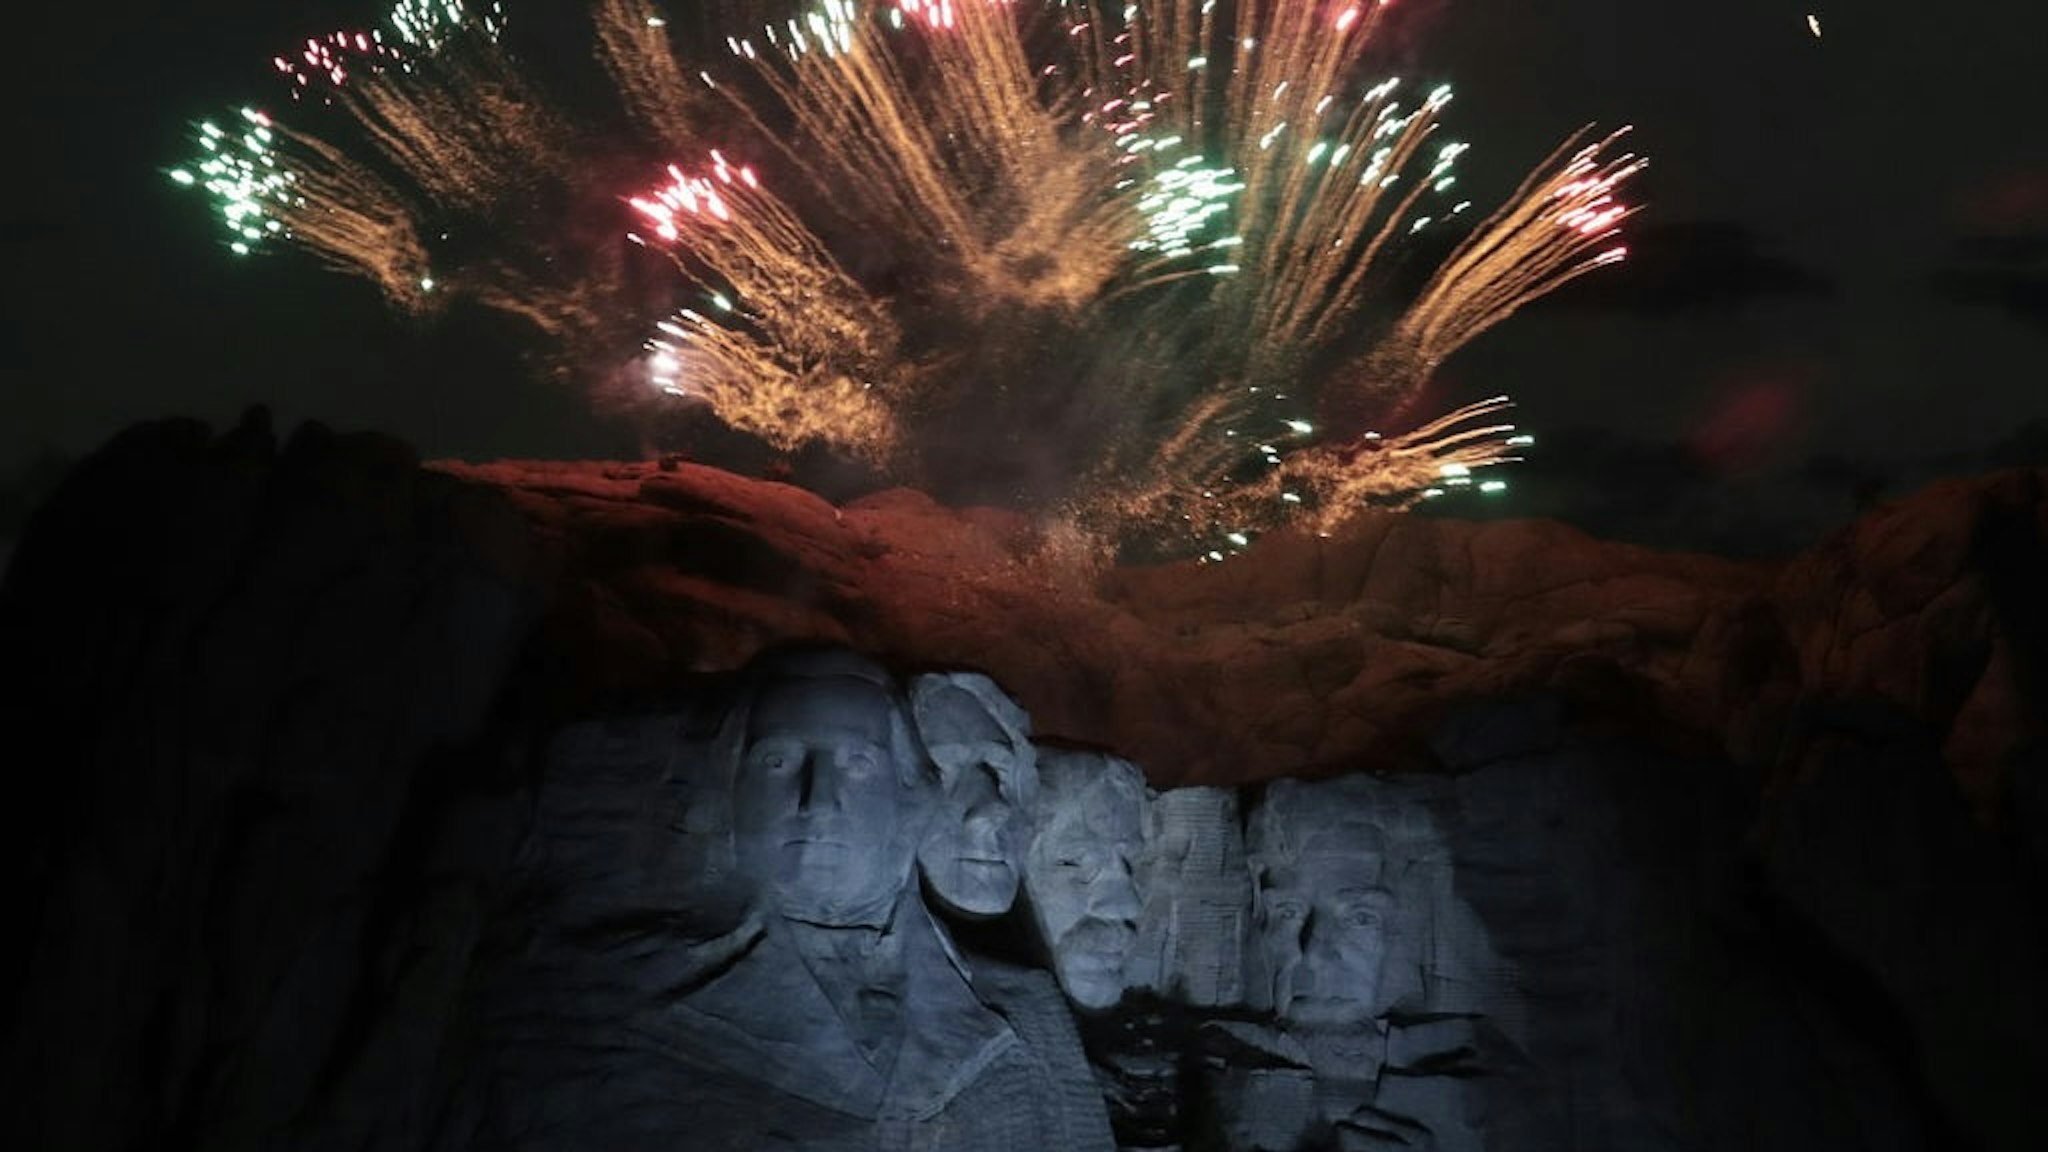 President Trump Hosts Independence Day Fireworks At Mount Rushmore KEYSTONE, SOUTH DAKOTA - JULY 03: Fireworks light up the sky above Mount Rushmore National Monument on July 03, 2020 near Keystone, South Dakota. President Donald Trump spoke before the start of the fireworks display, the first at the monument in about a decade. (Photo by Scott Olson/Getty Images) Scott Olson / Staff via Getty Images